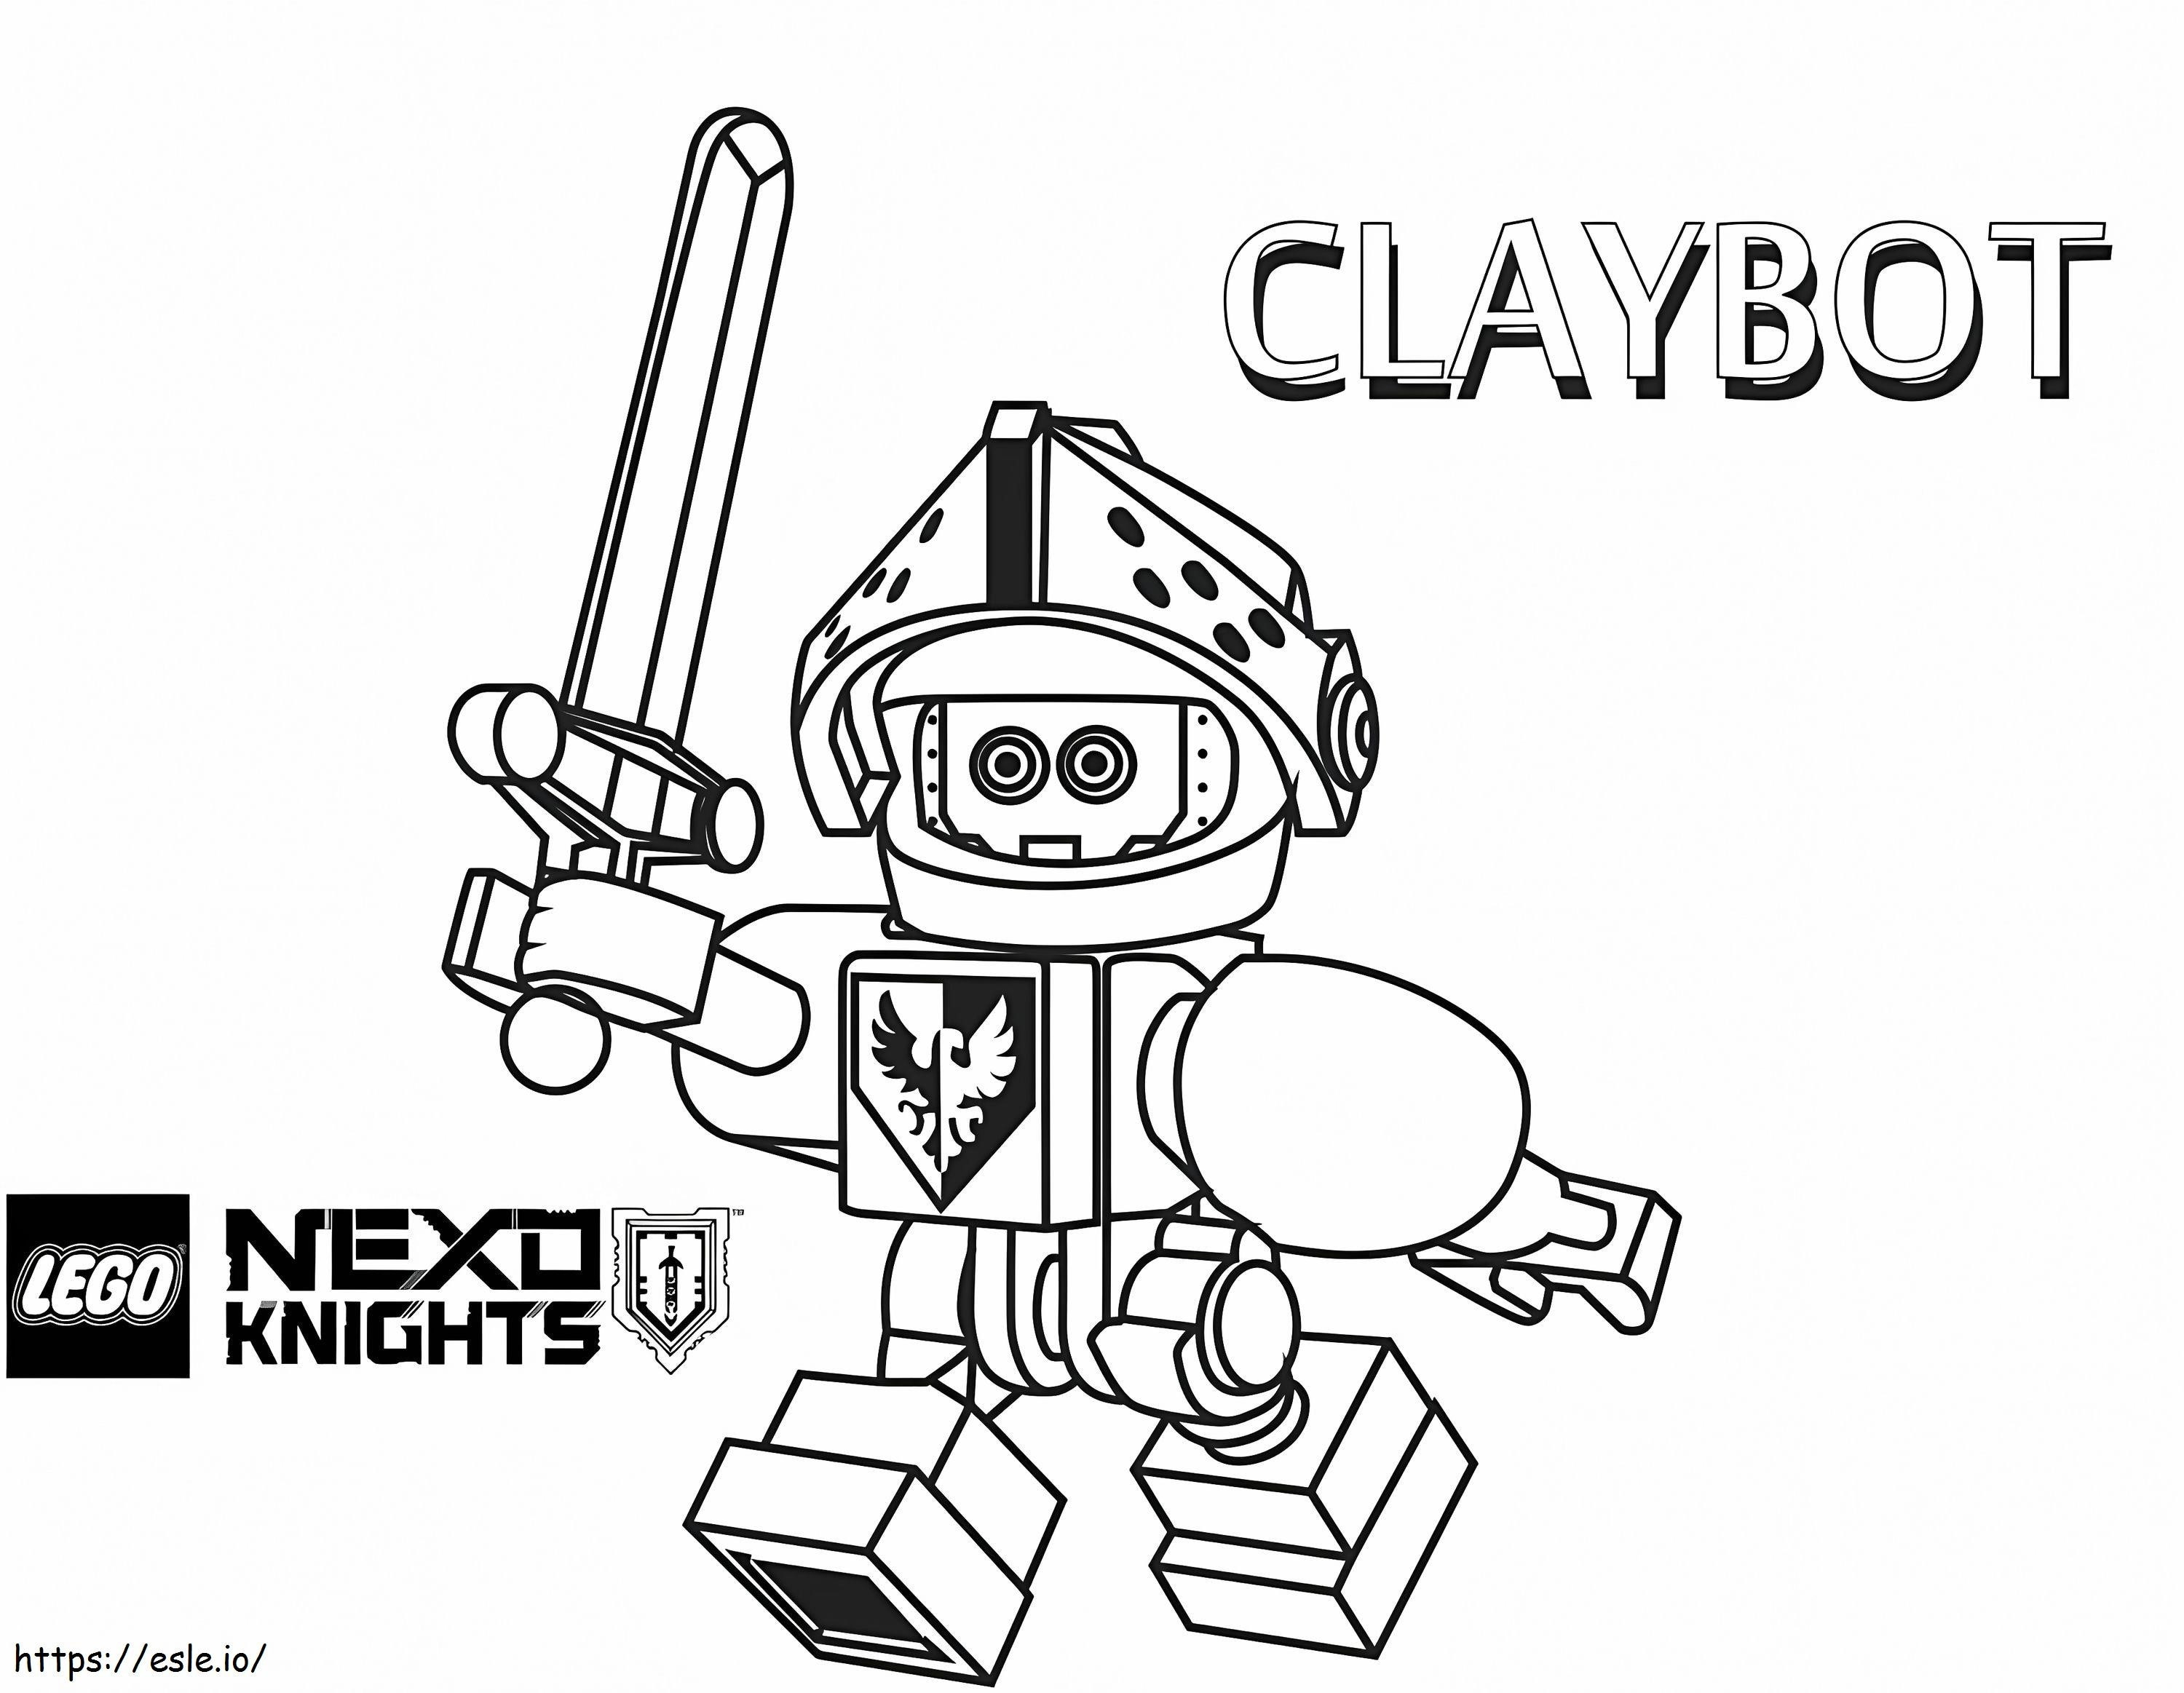 1593220293 Laybot coloring page